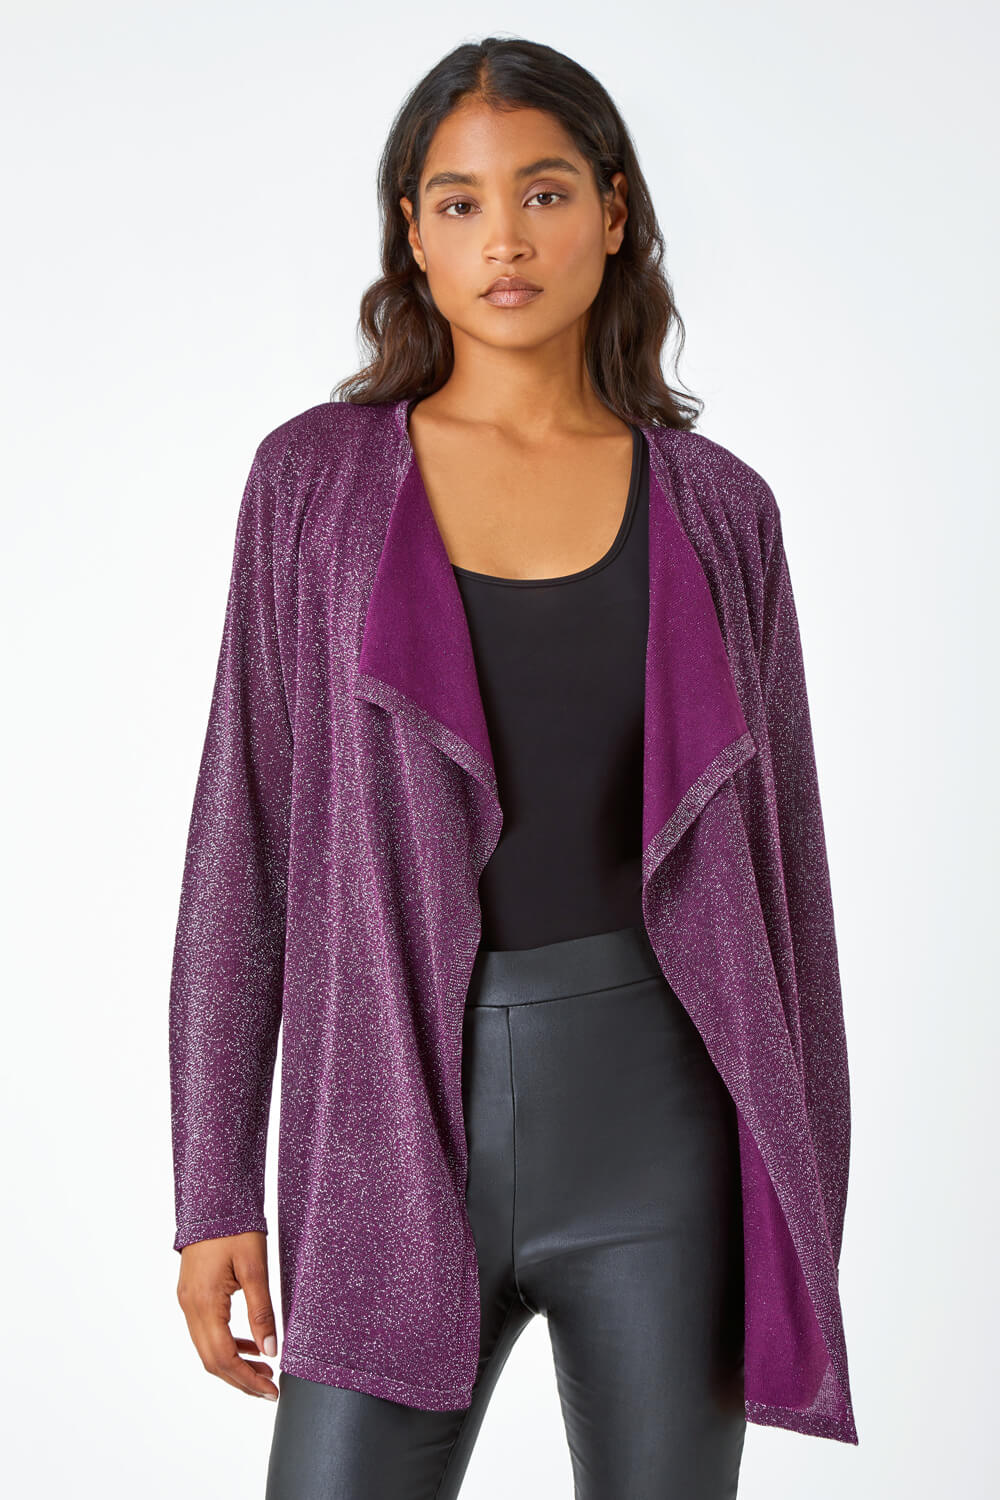 Aubergine Shimmer Waterfall Stretch Cardigan, Image 4 of 5